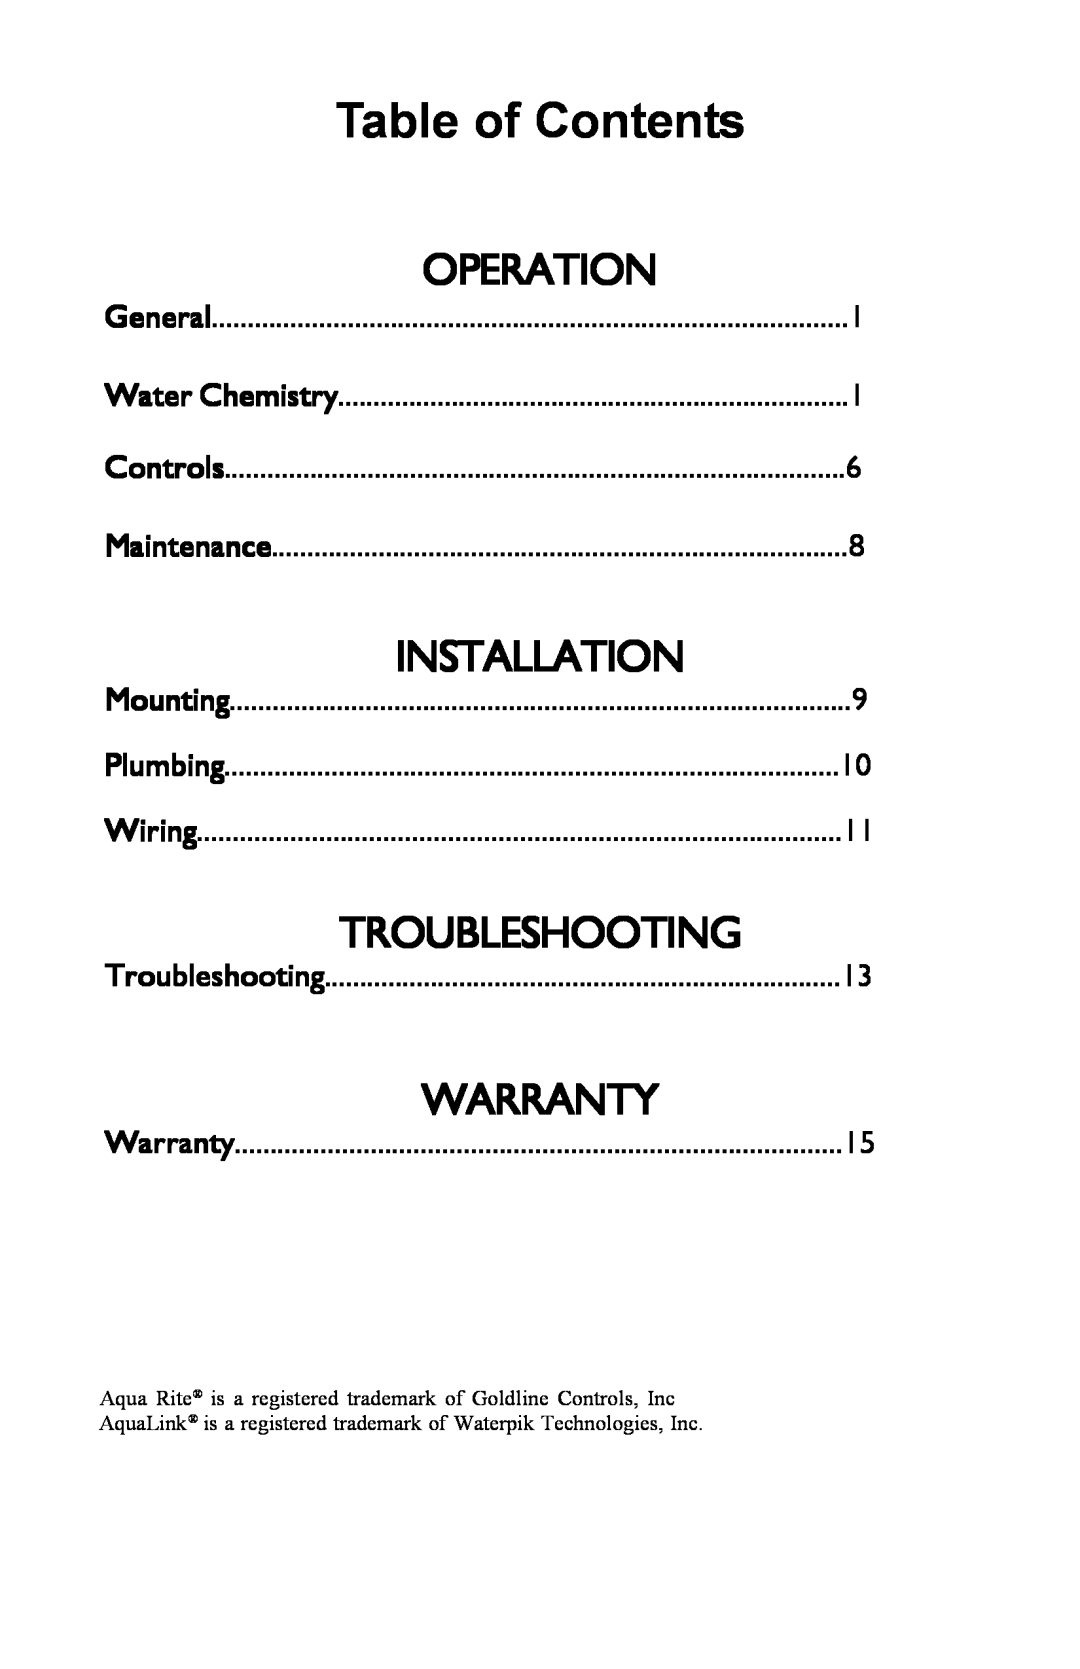 Waterpik Technologies Electronic Chlorine Generator Operation, Installation, Troubleshooting, Table of Contents, Warranty 